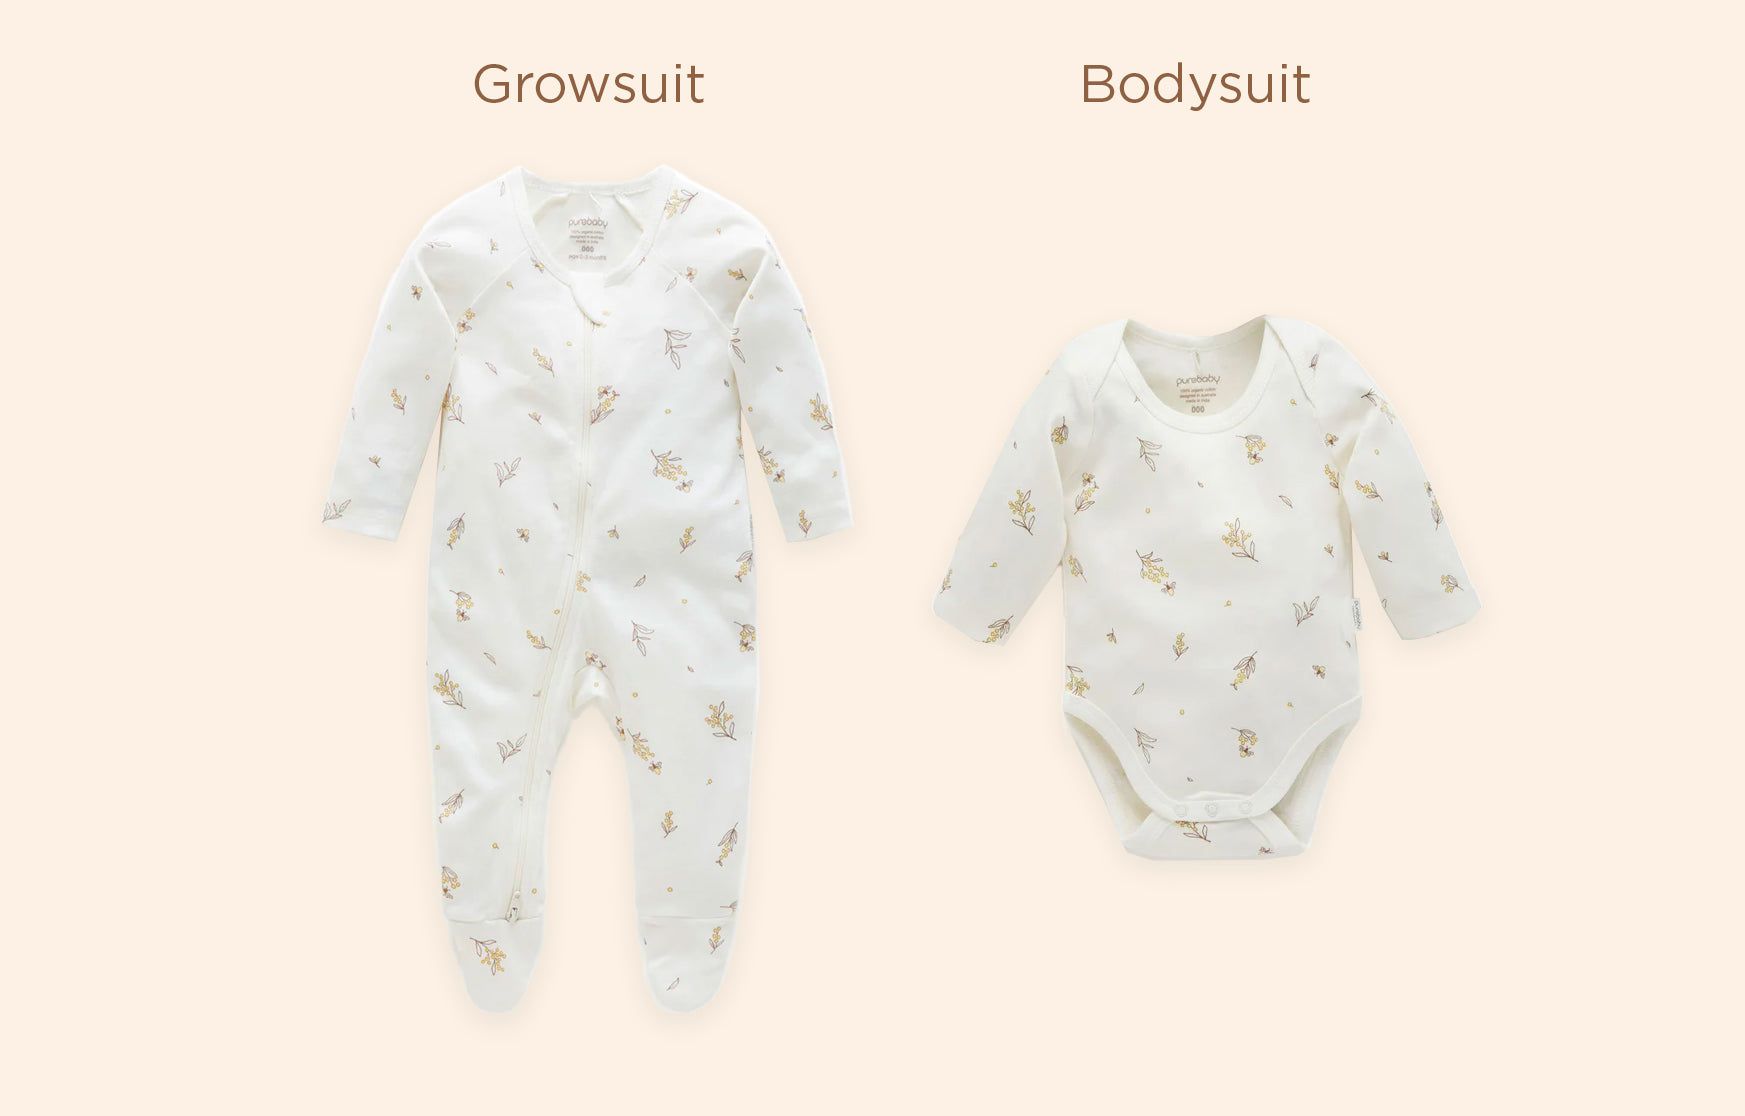 Image of a Growsuit and bodysuit next to each other